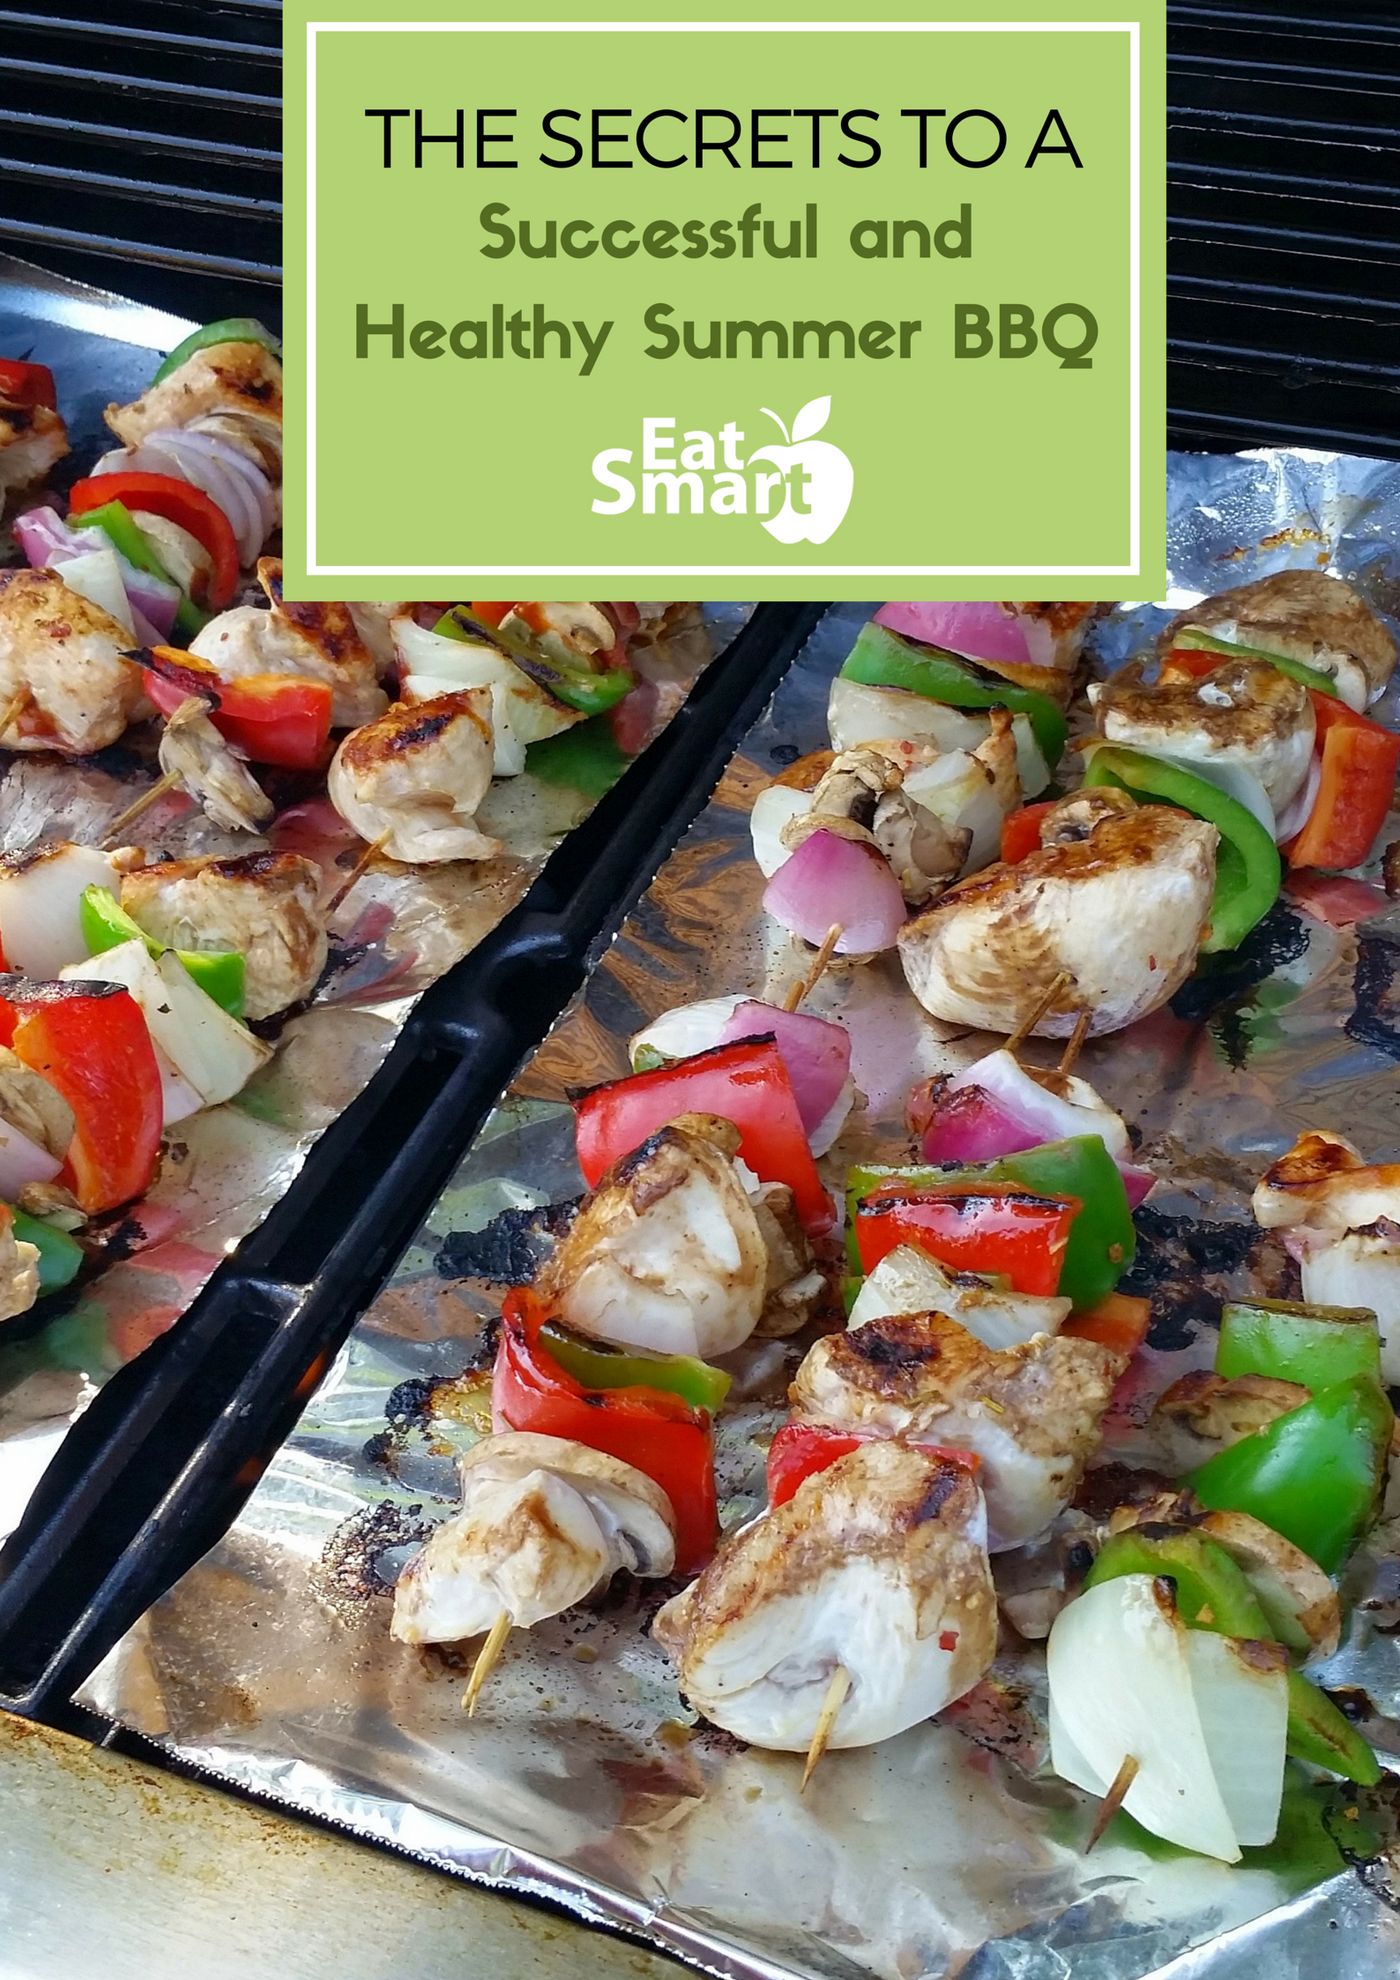 The Secrets to a Successful and Healthy Summer BBQ